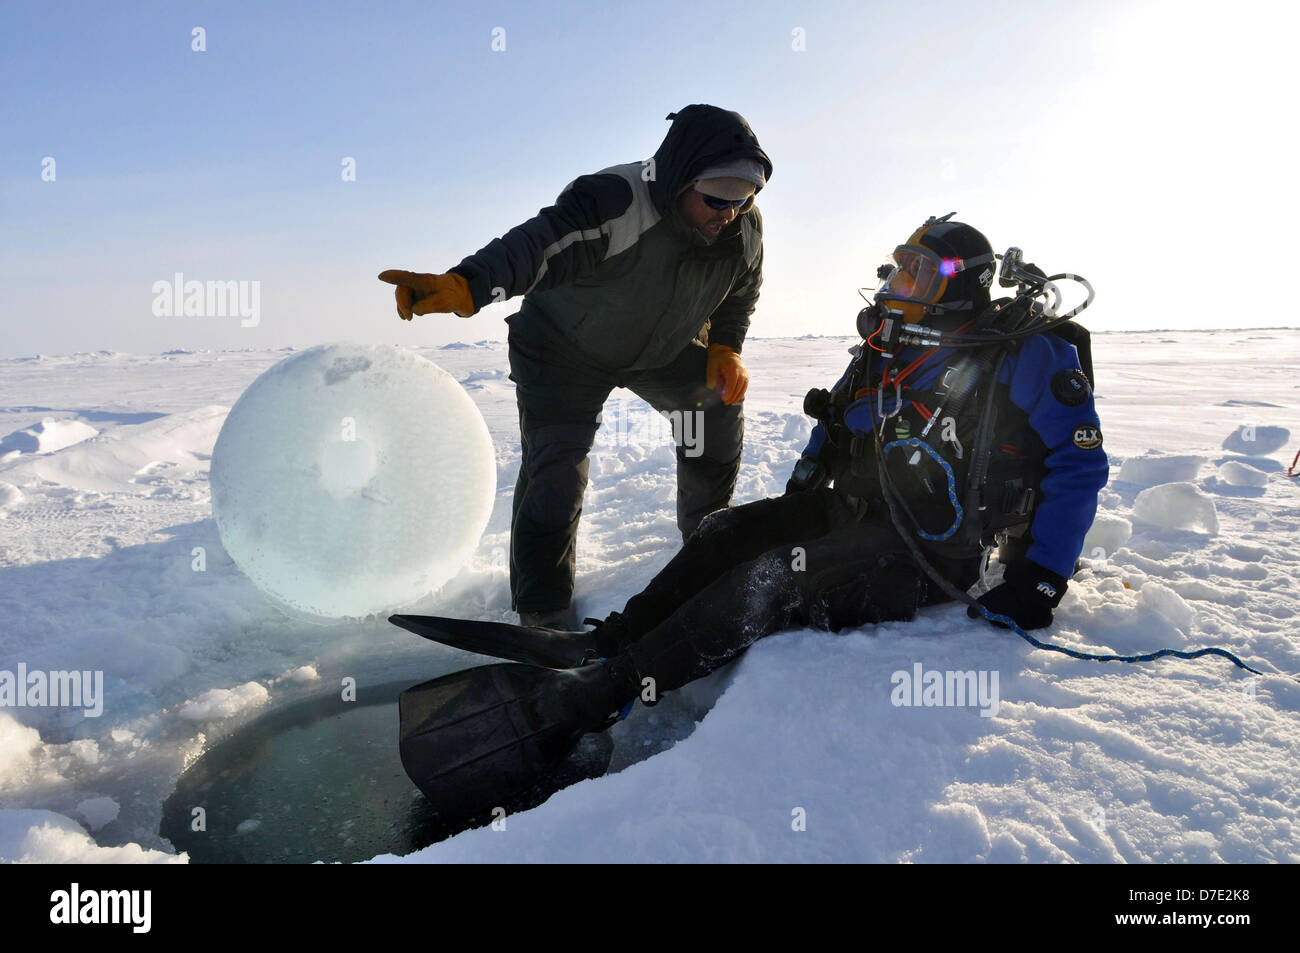 Paul Aguilar, of the University of Washington Applied Physics Laboratory works with Pete Pehl, a member of the Applied Physics Laboratory dive team to recover a torpedo from under the ice while participating with the US Navy Los Angeles-class nuclear attack submarine USS Annapolis in Ice Exercise March 21, 2009 in the Arctic Ocean. Stock Photo